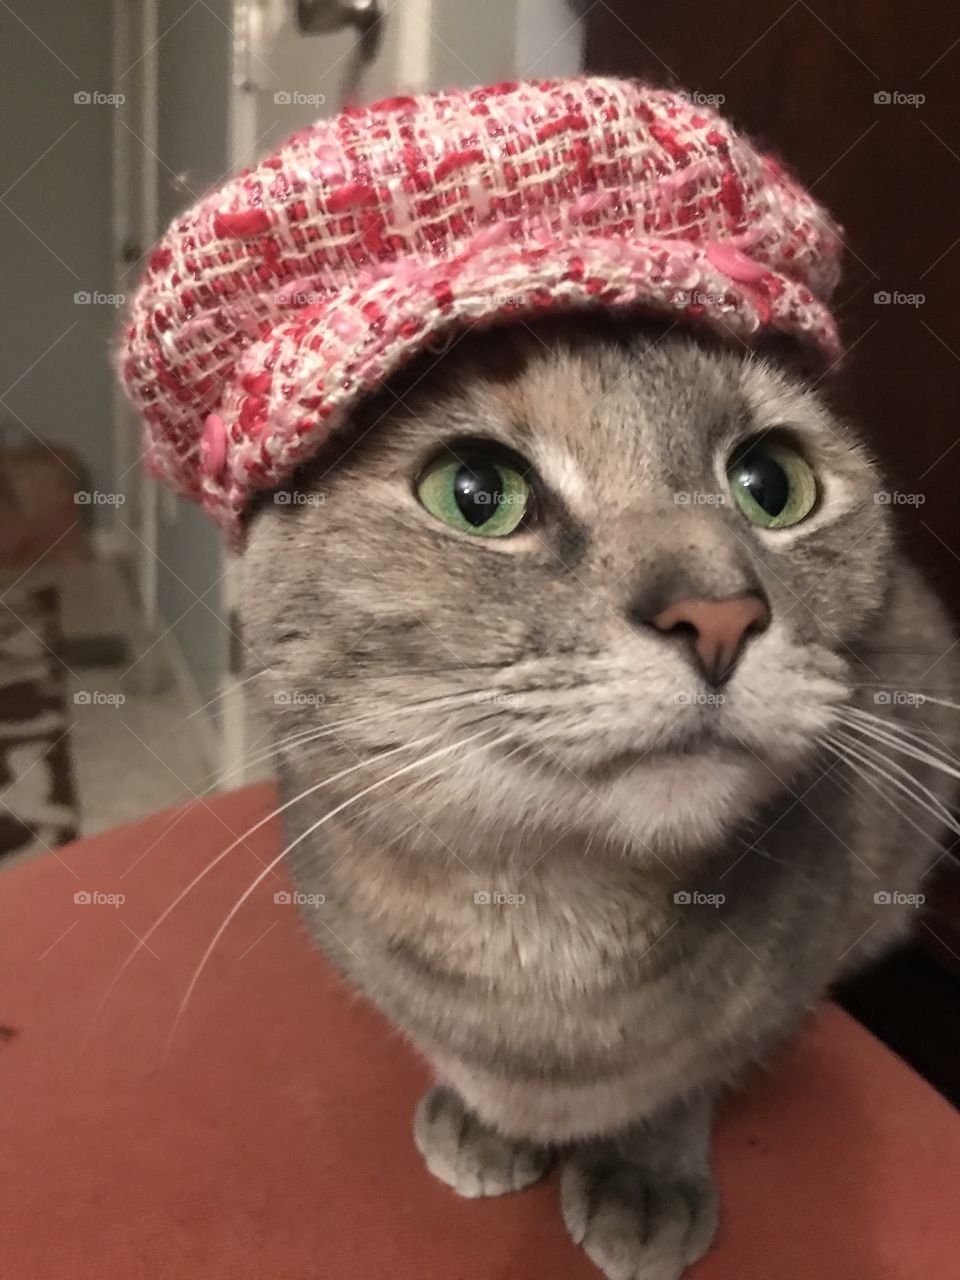 The Kitty and The Hat